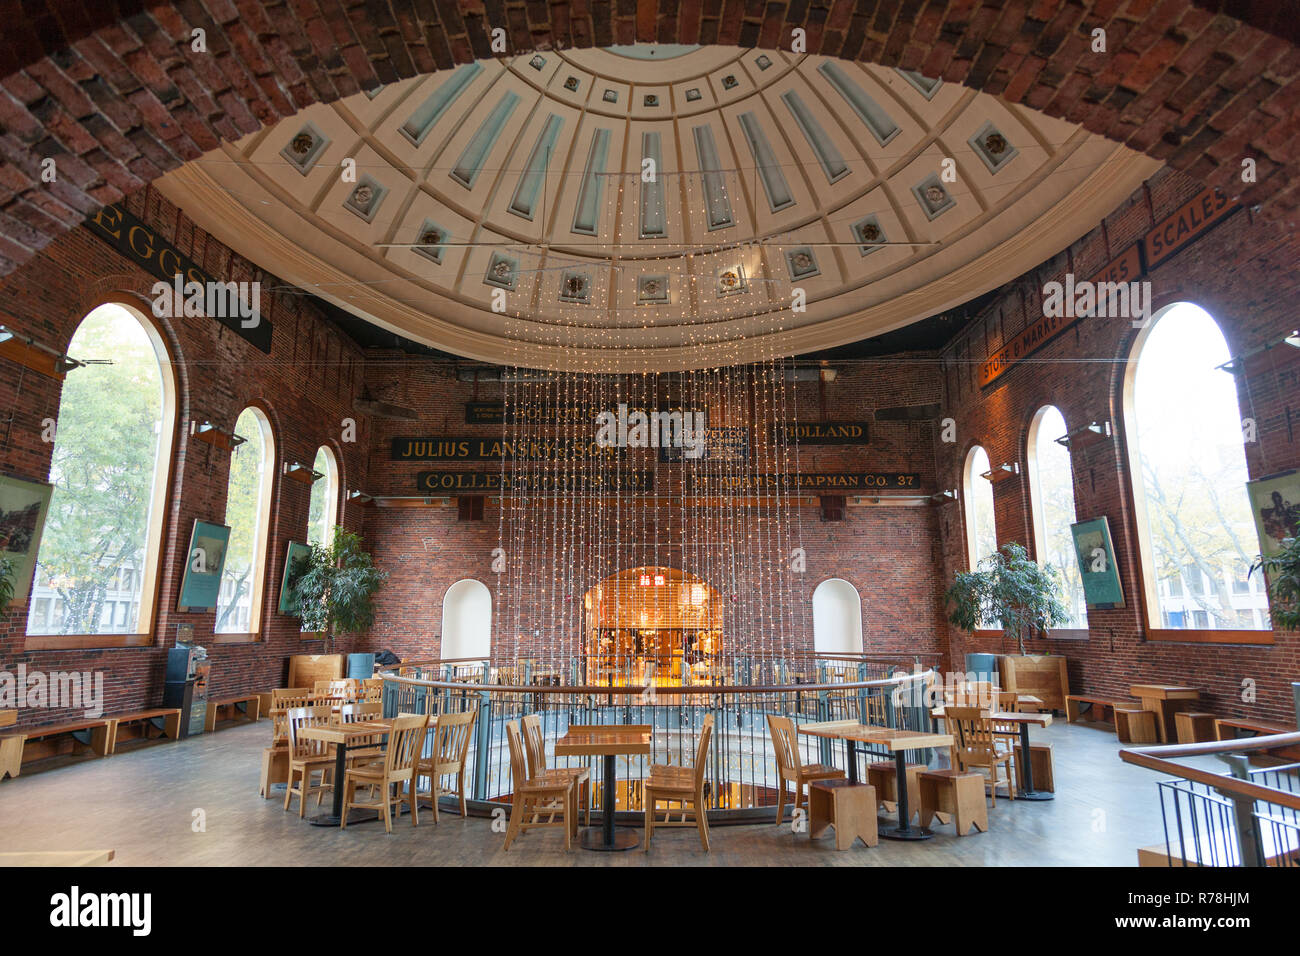 Central domed food hall at Quincy Market, Boston, Massachusetts, United States of America. Stock Photo